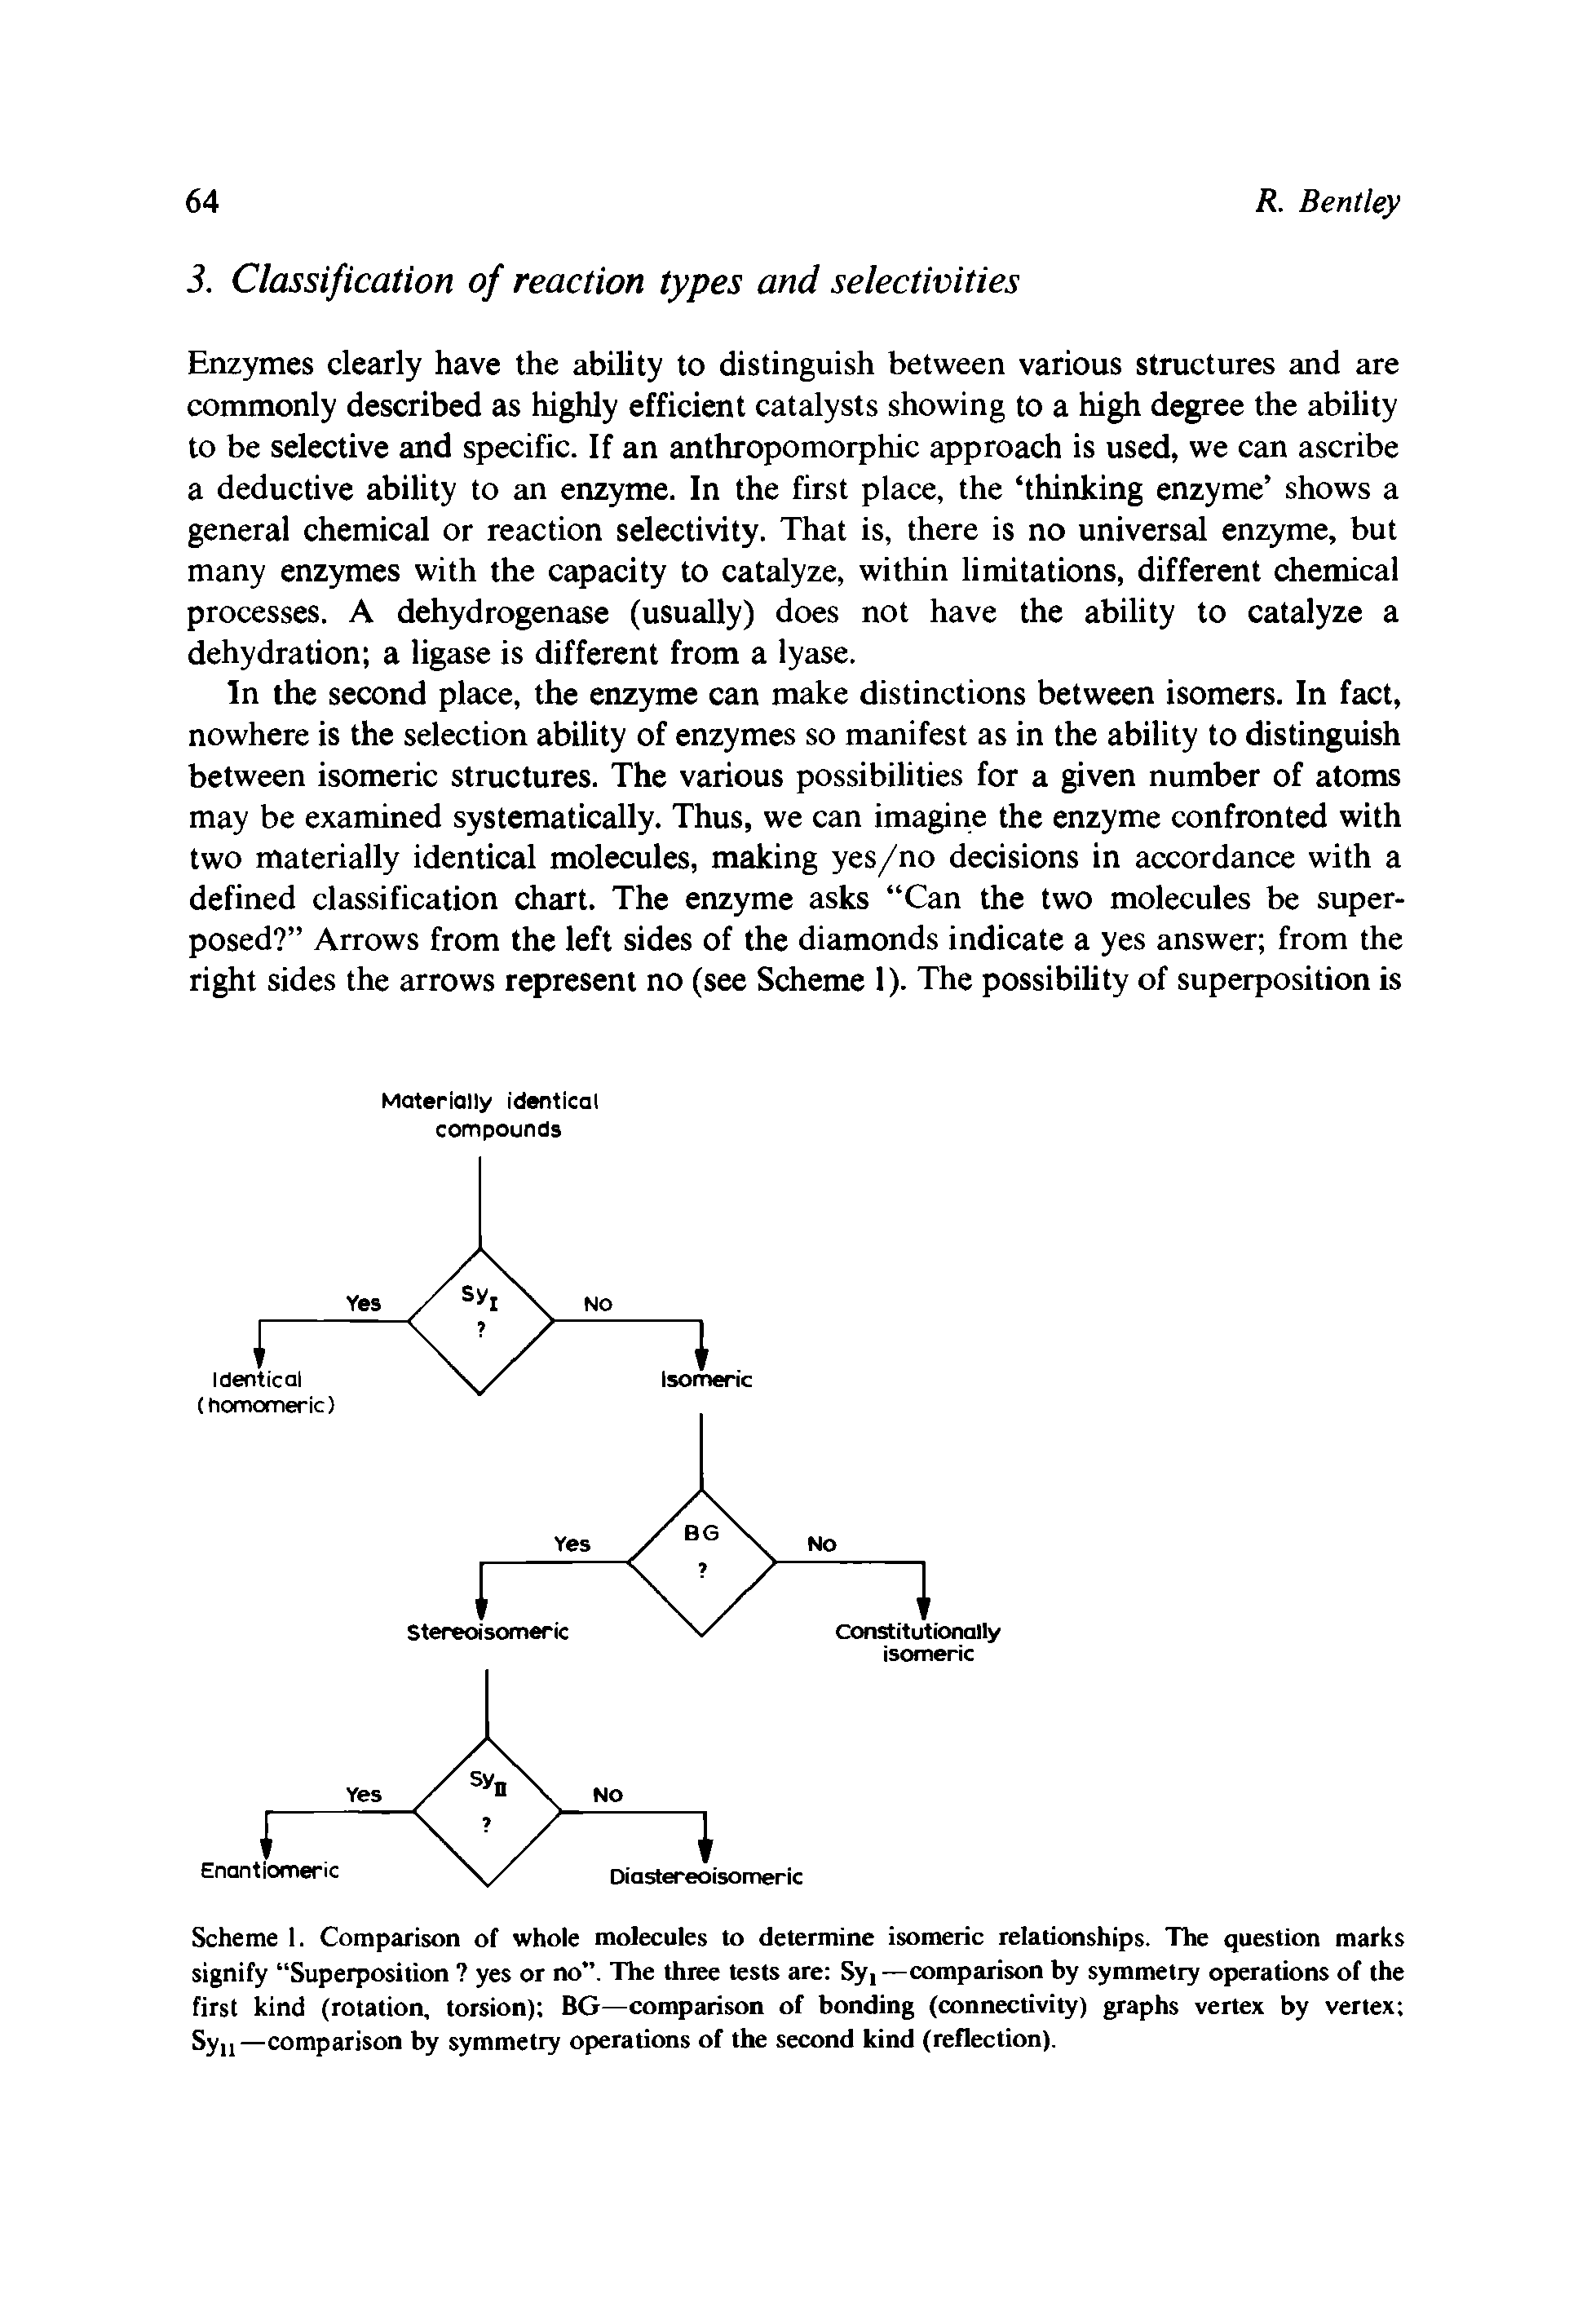 Scheme 1. Comparison of whole molecules to determine isomeric relationships. The question marks signify Superposition yes or no . The three tests are Syi —comparison by symmetry operations of the first kind (rotation, torsion) BG—comparison of bonding (connectivity) graphs vertex by vertex Syn—comparison by symmetry operations of the second kind (reflection).